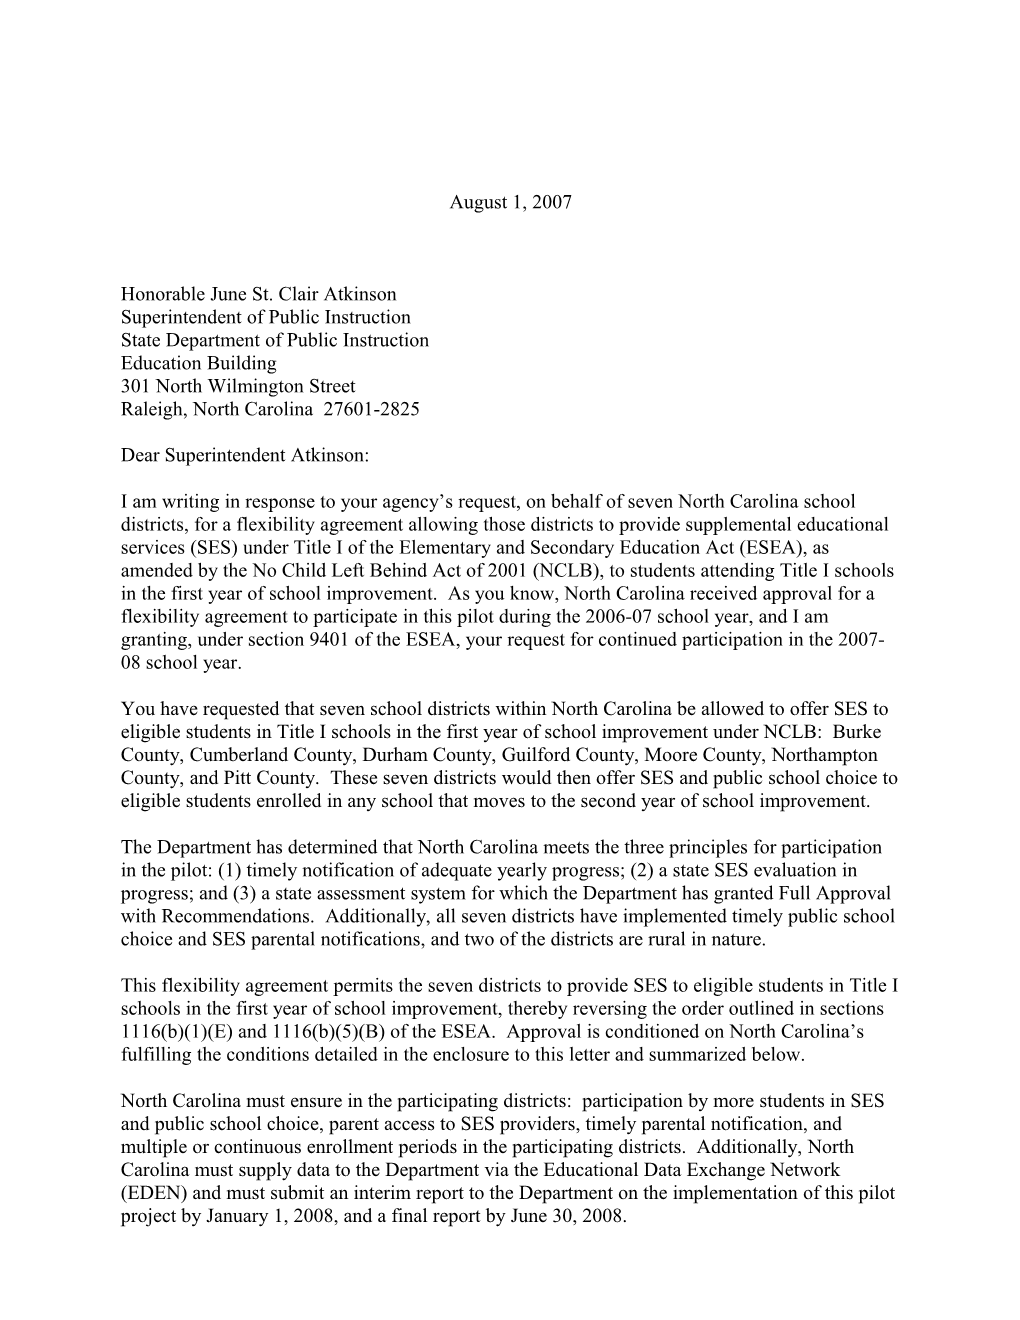 Letter to NC Superintendent Allowing Some of Thier Districts to Offer SES to Eligible Students